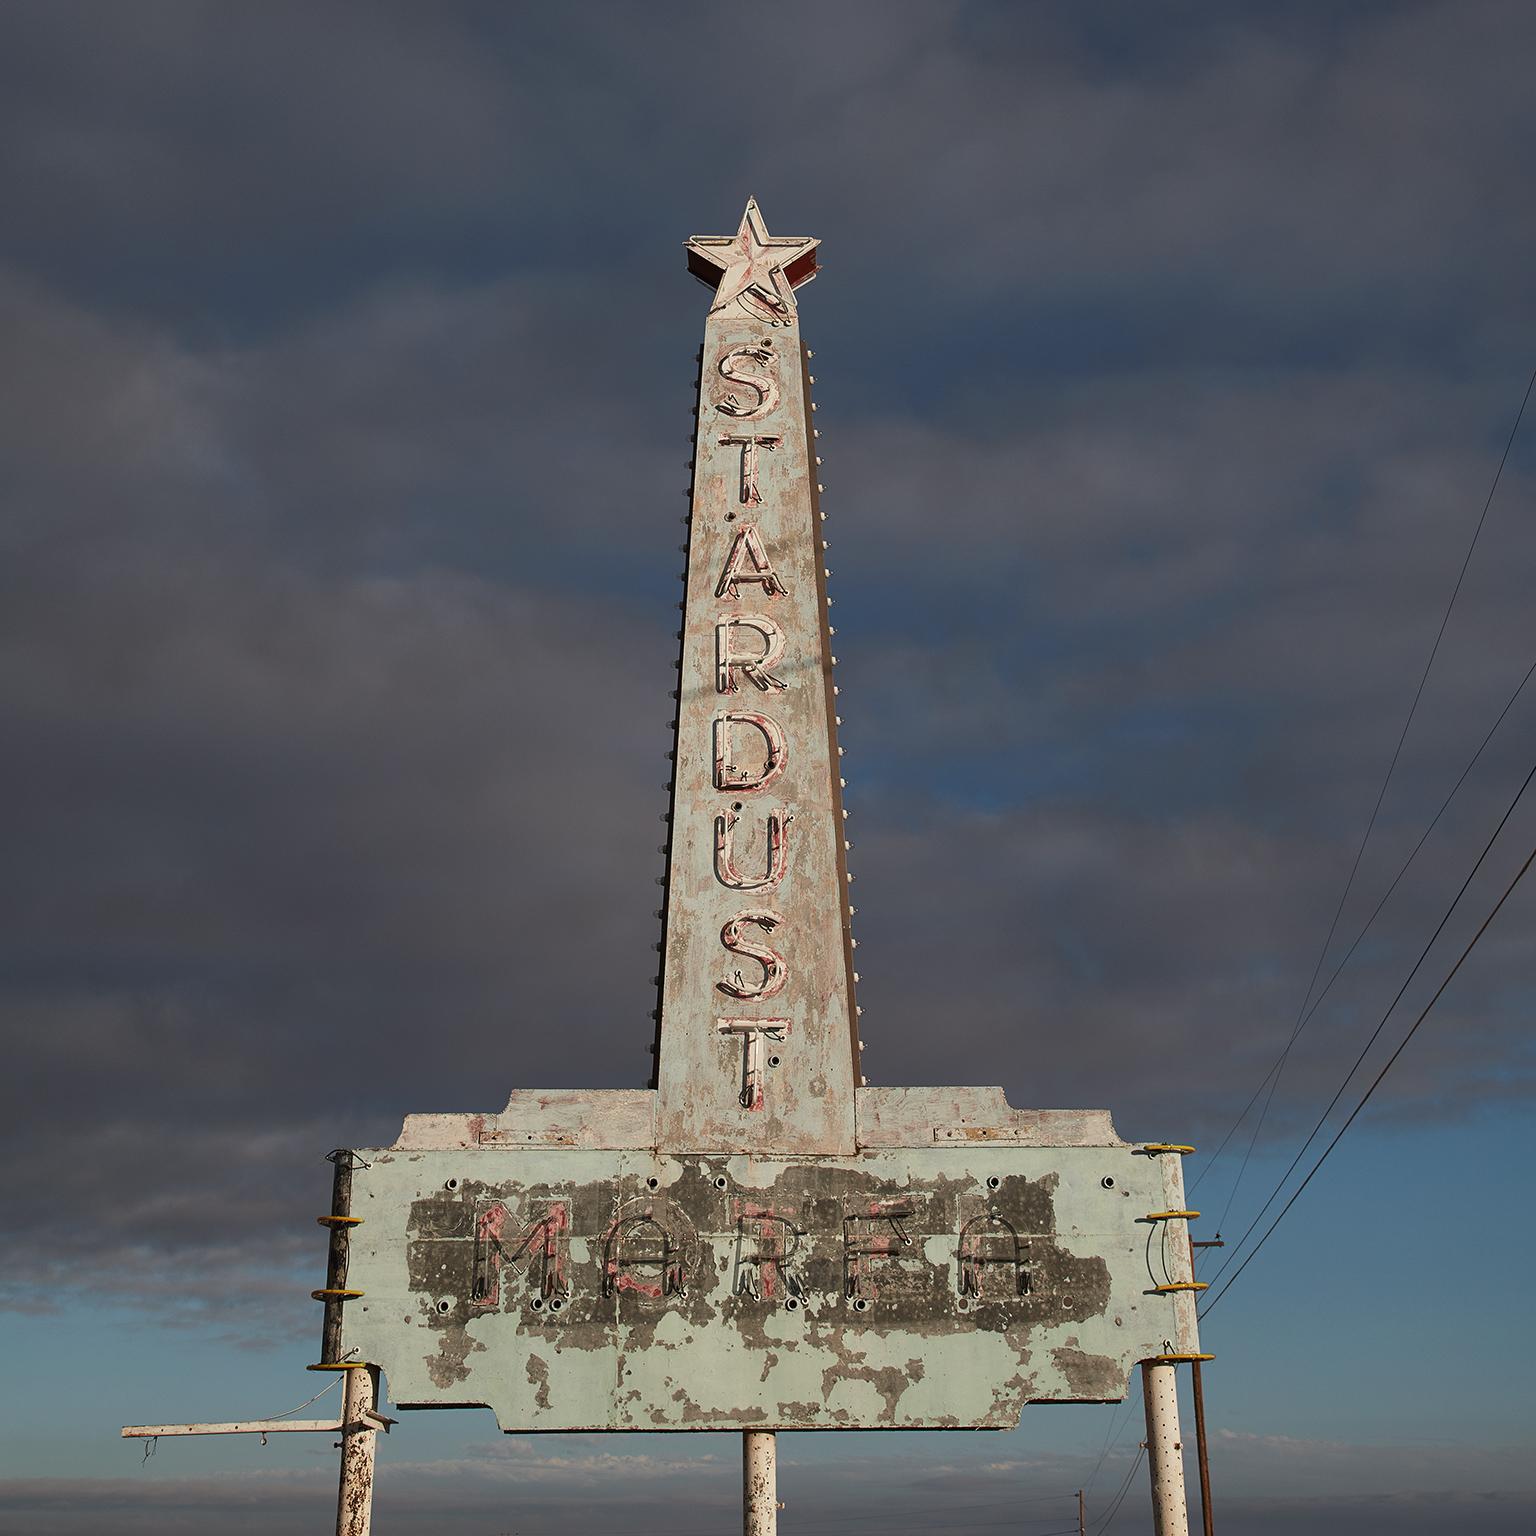 Stardust - extra large format photograph of Marfa Sign and Horizon